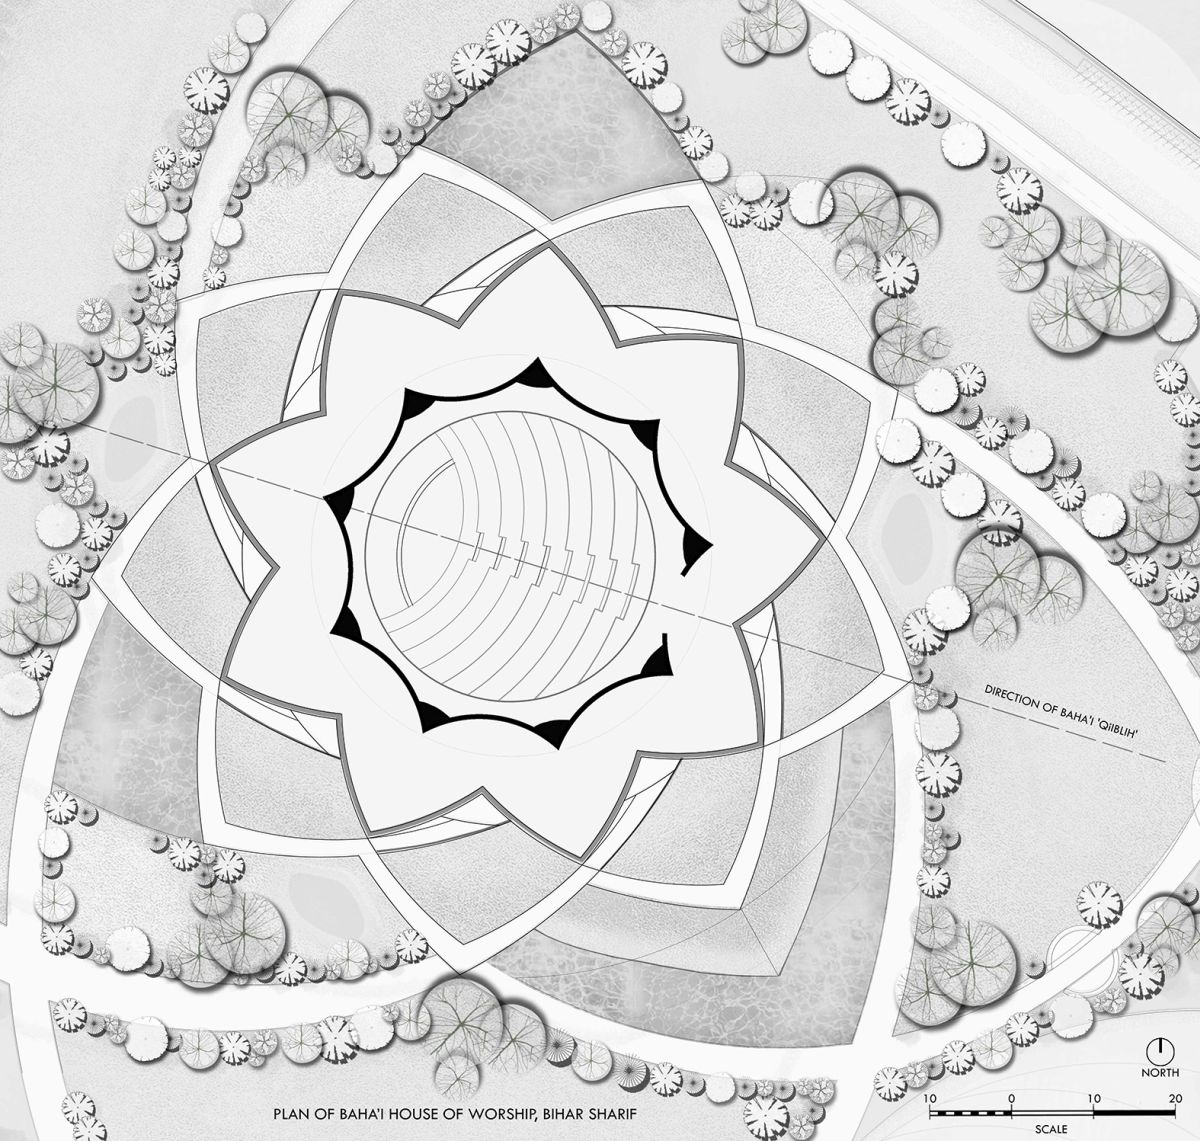 Baha'I Temple at Bihar, an award winning proposal by Spacematters 12